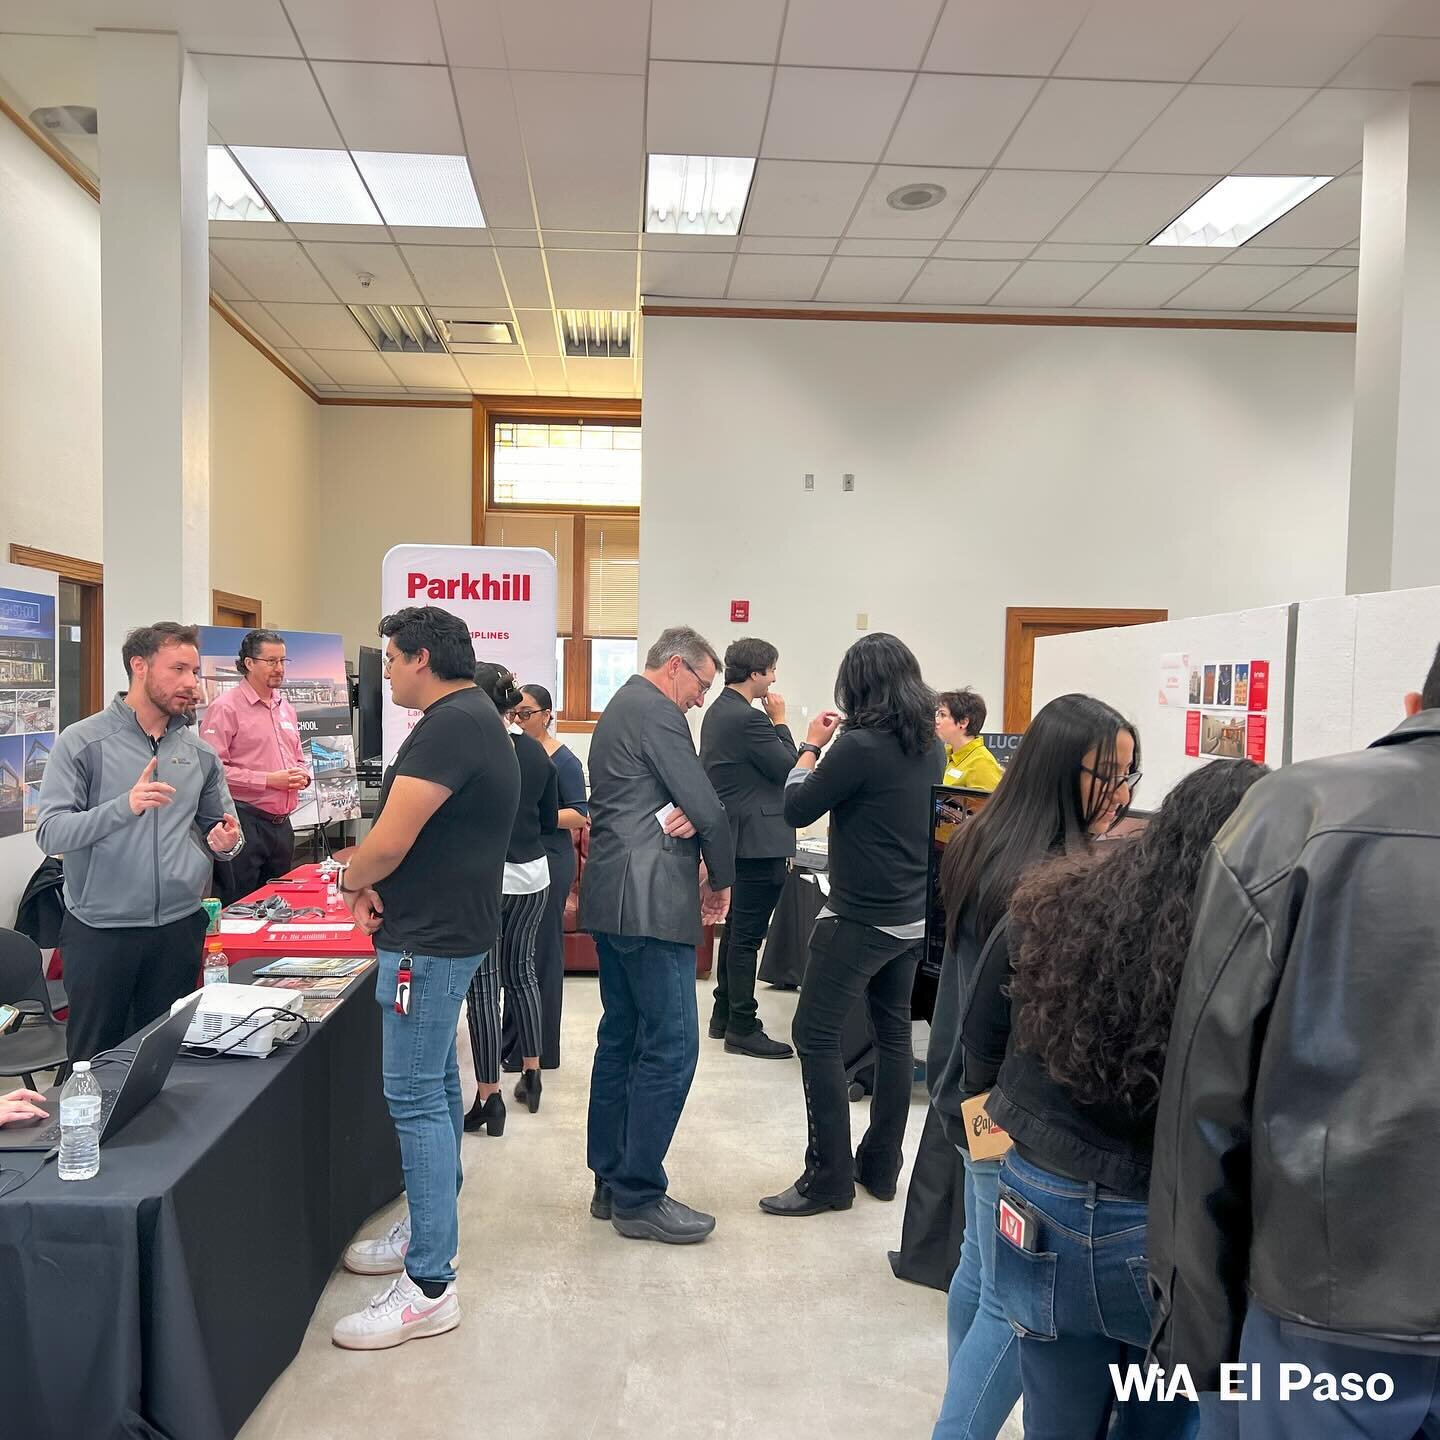 ✨Thank you to all the students, architecture firms, and university staff who participated in making our recent TTU Career Fair a success! 🙌✨From insightful discussions to valuable networking opportunities, it was a day filled with excitement and pos